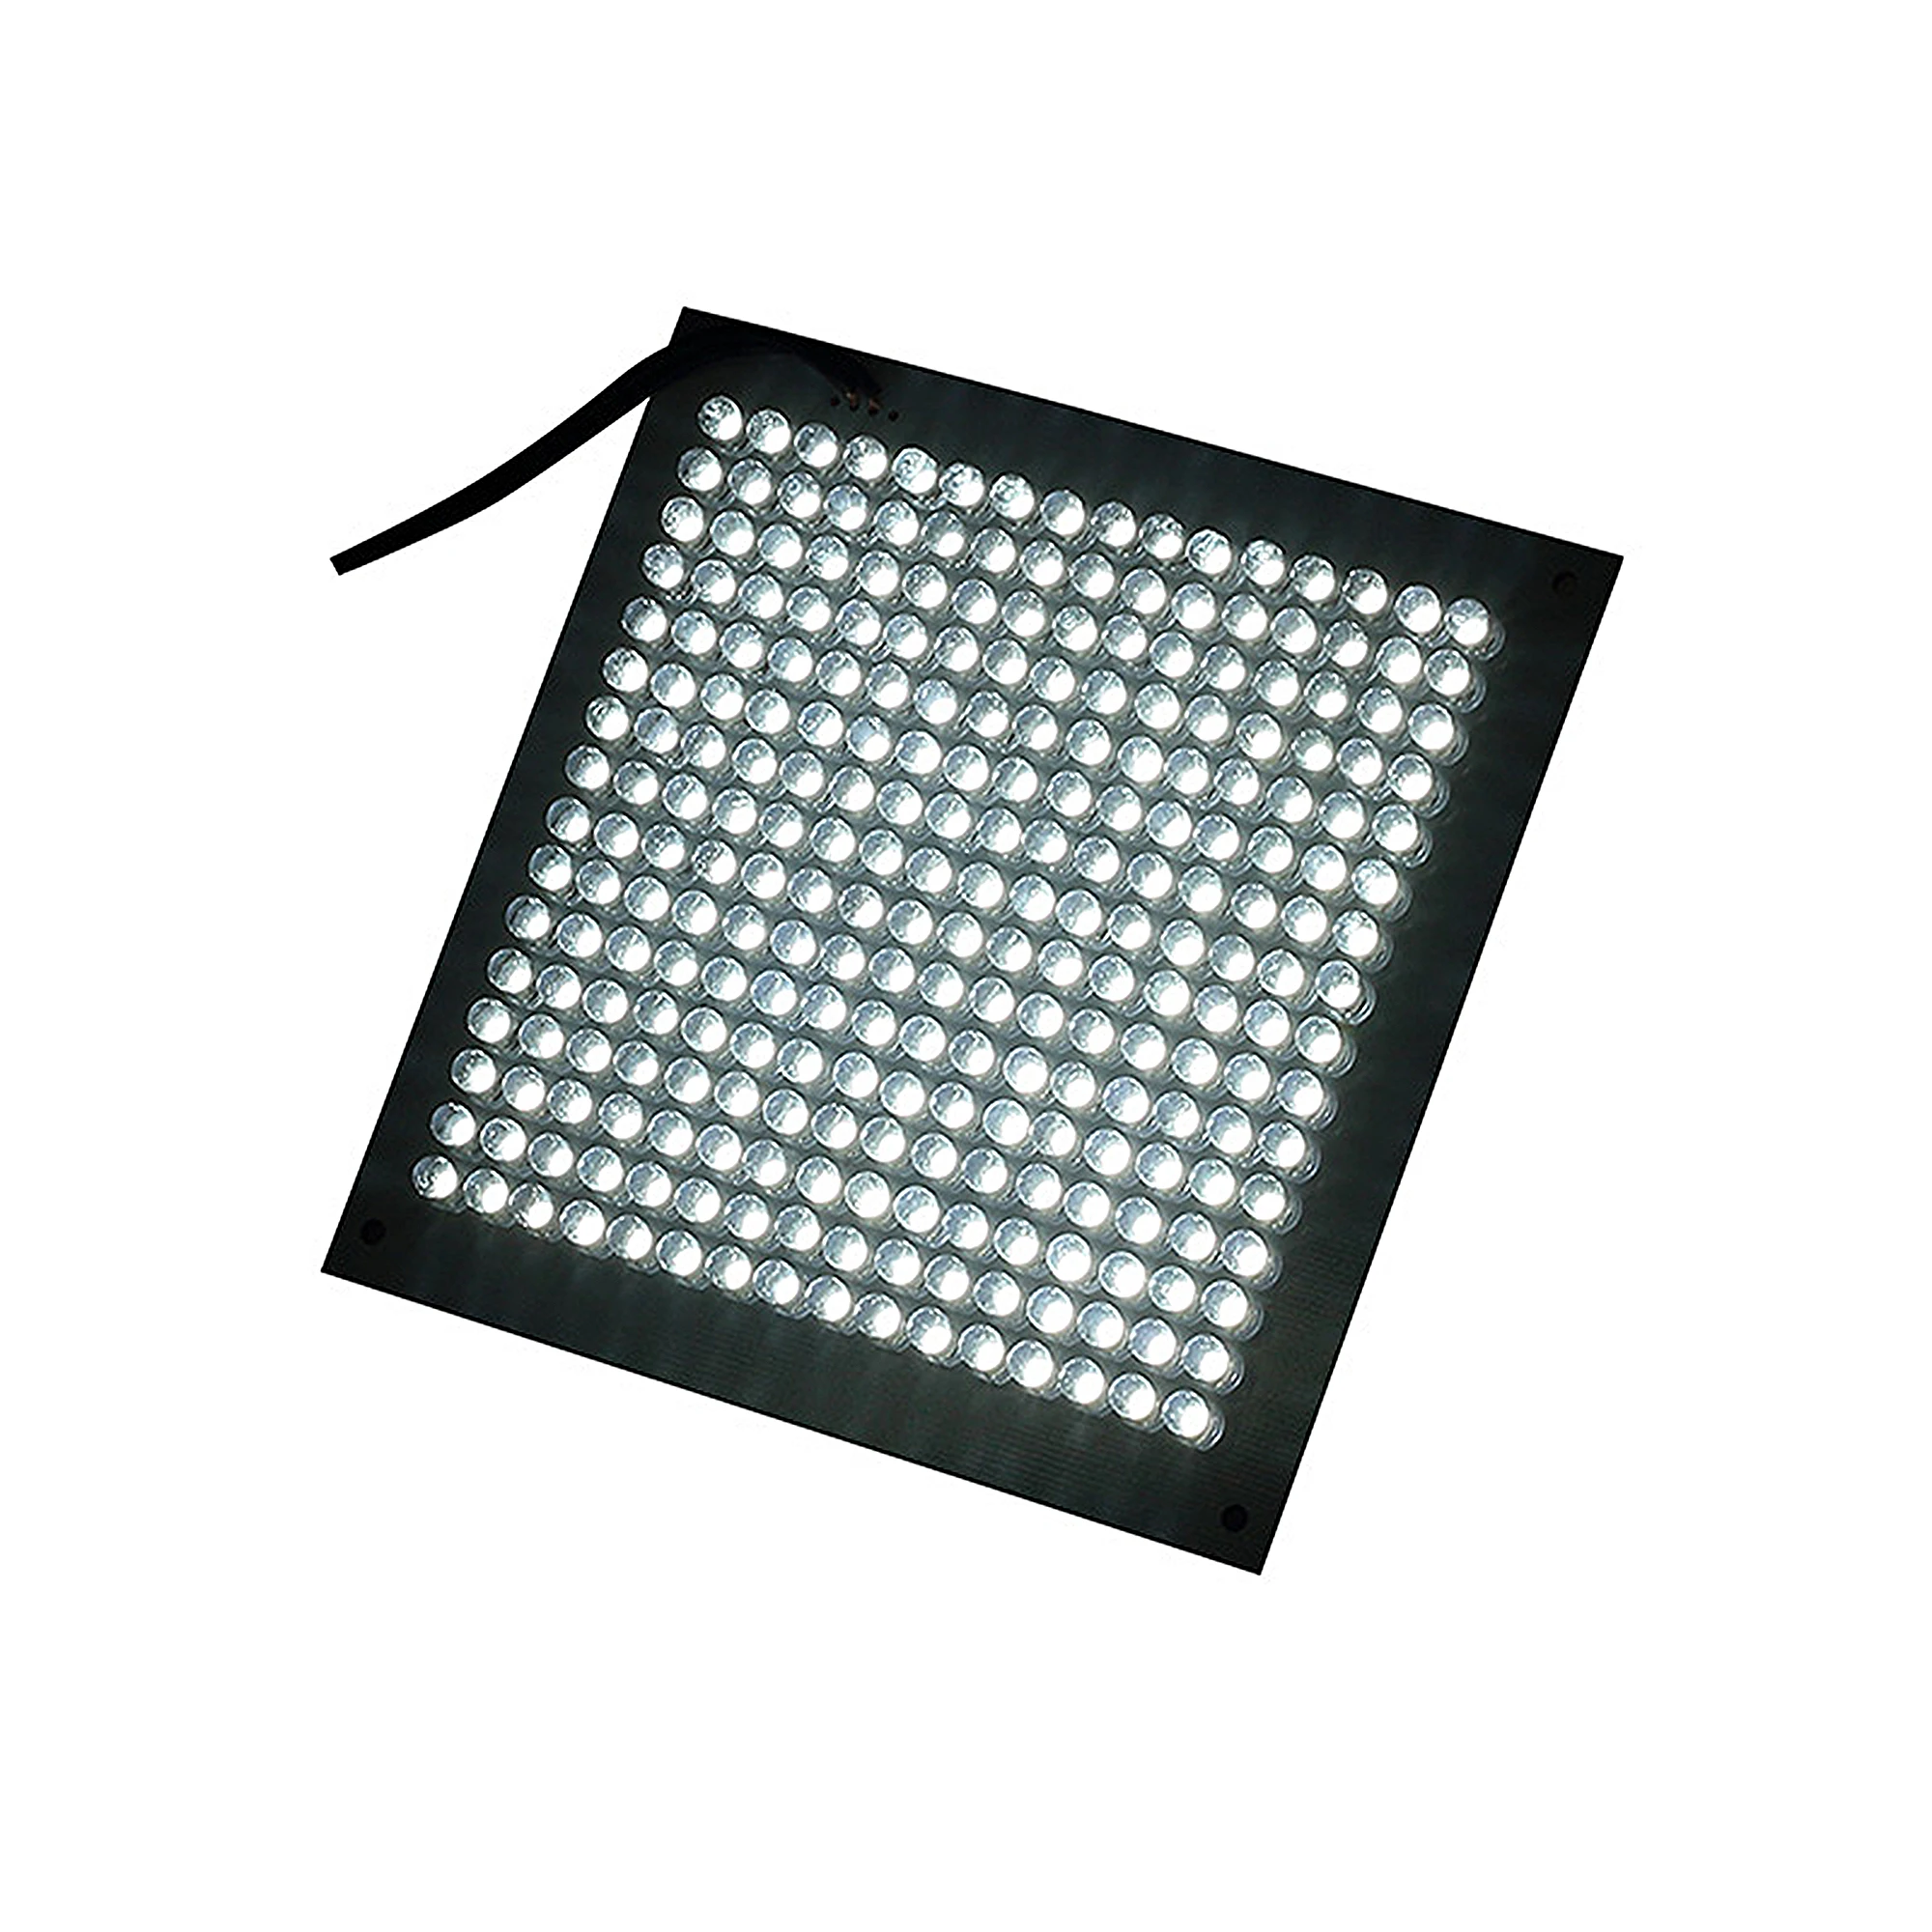 MACHINE IMAGE PROCESSING LIGHT ARTIFICIAL VISION LIGHTING AND DRIVERS DIFFERENT ANGLES LUDRE BACK LIGHT L1616